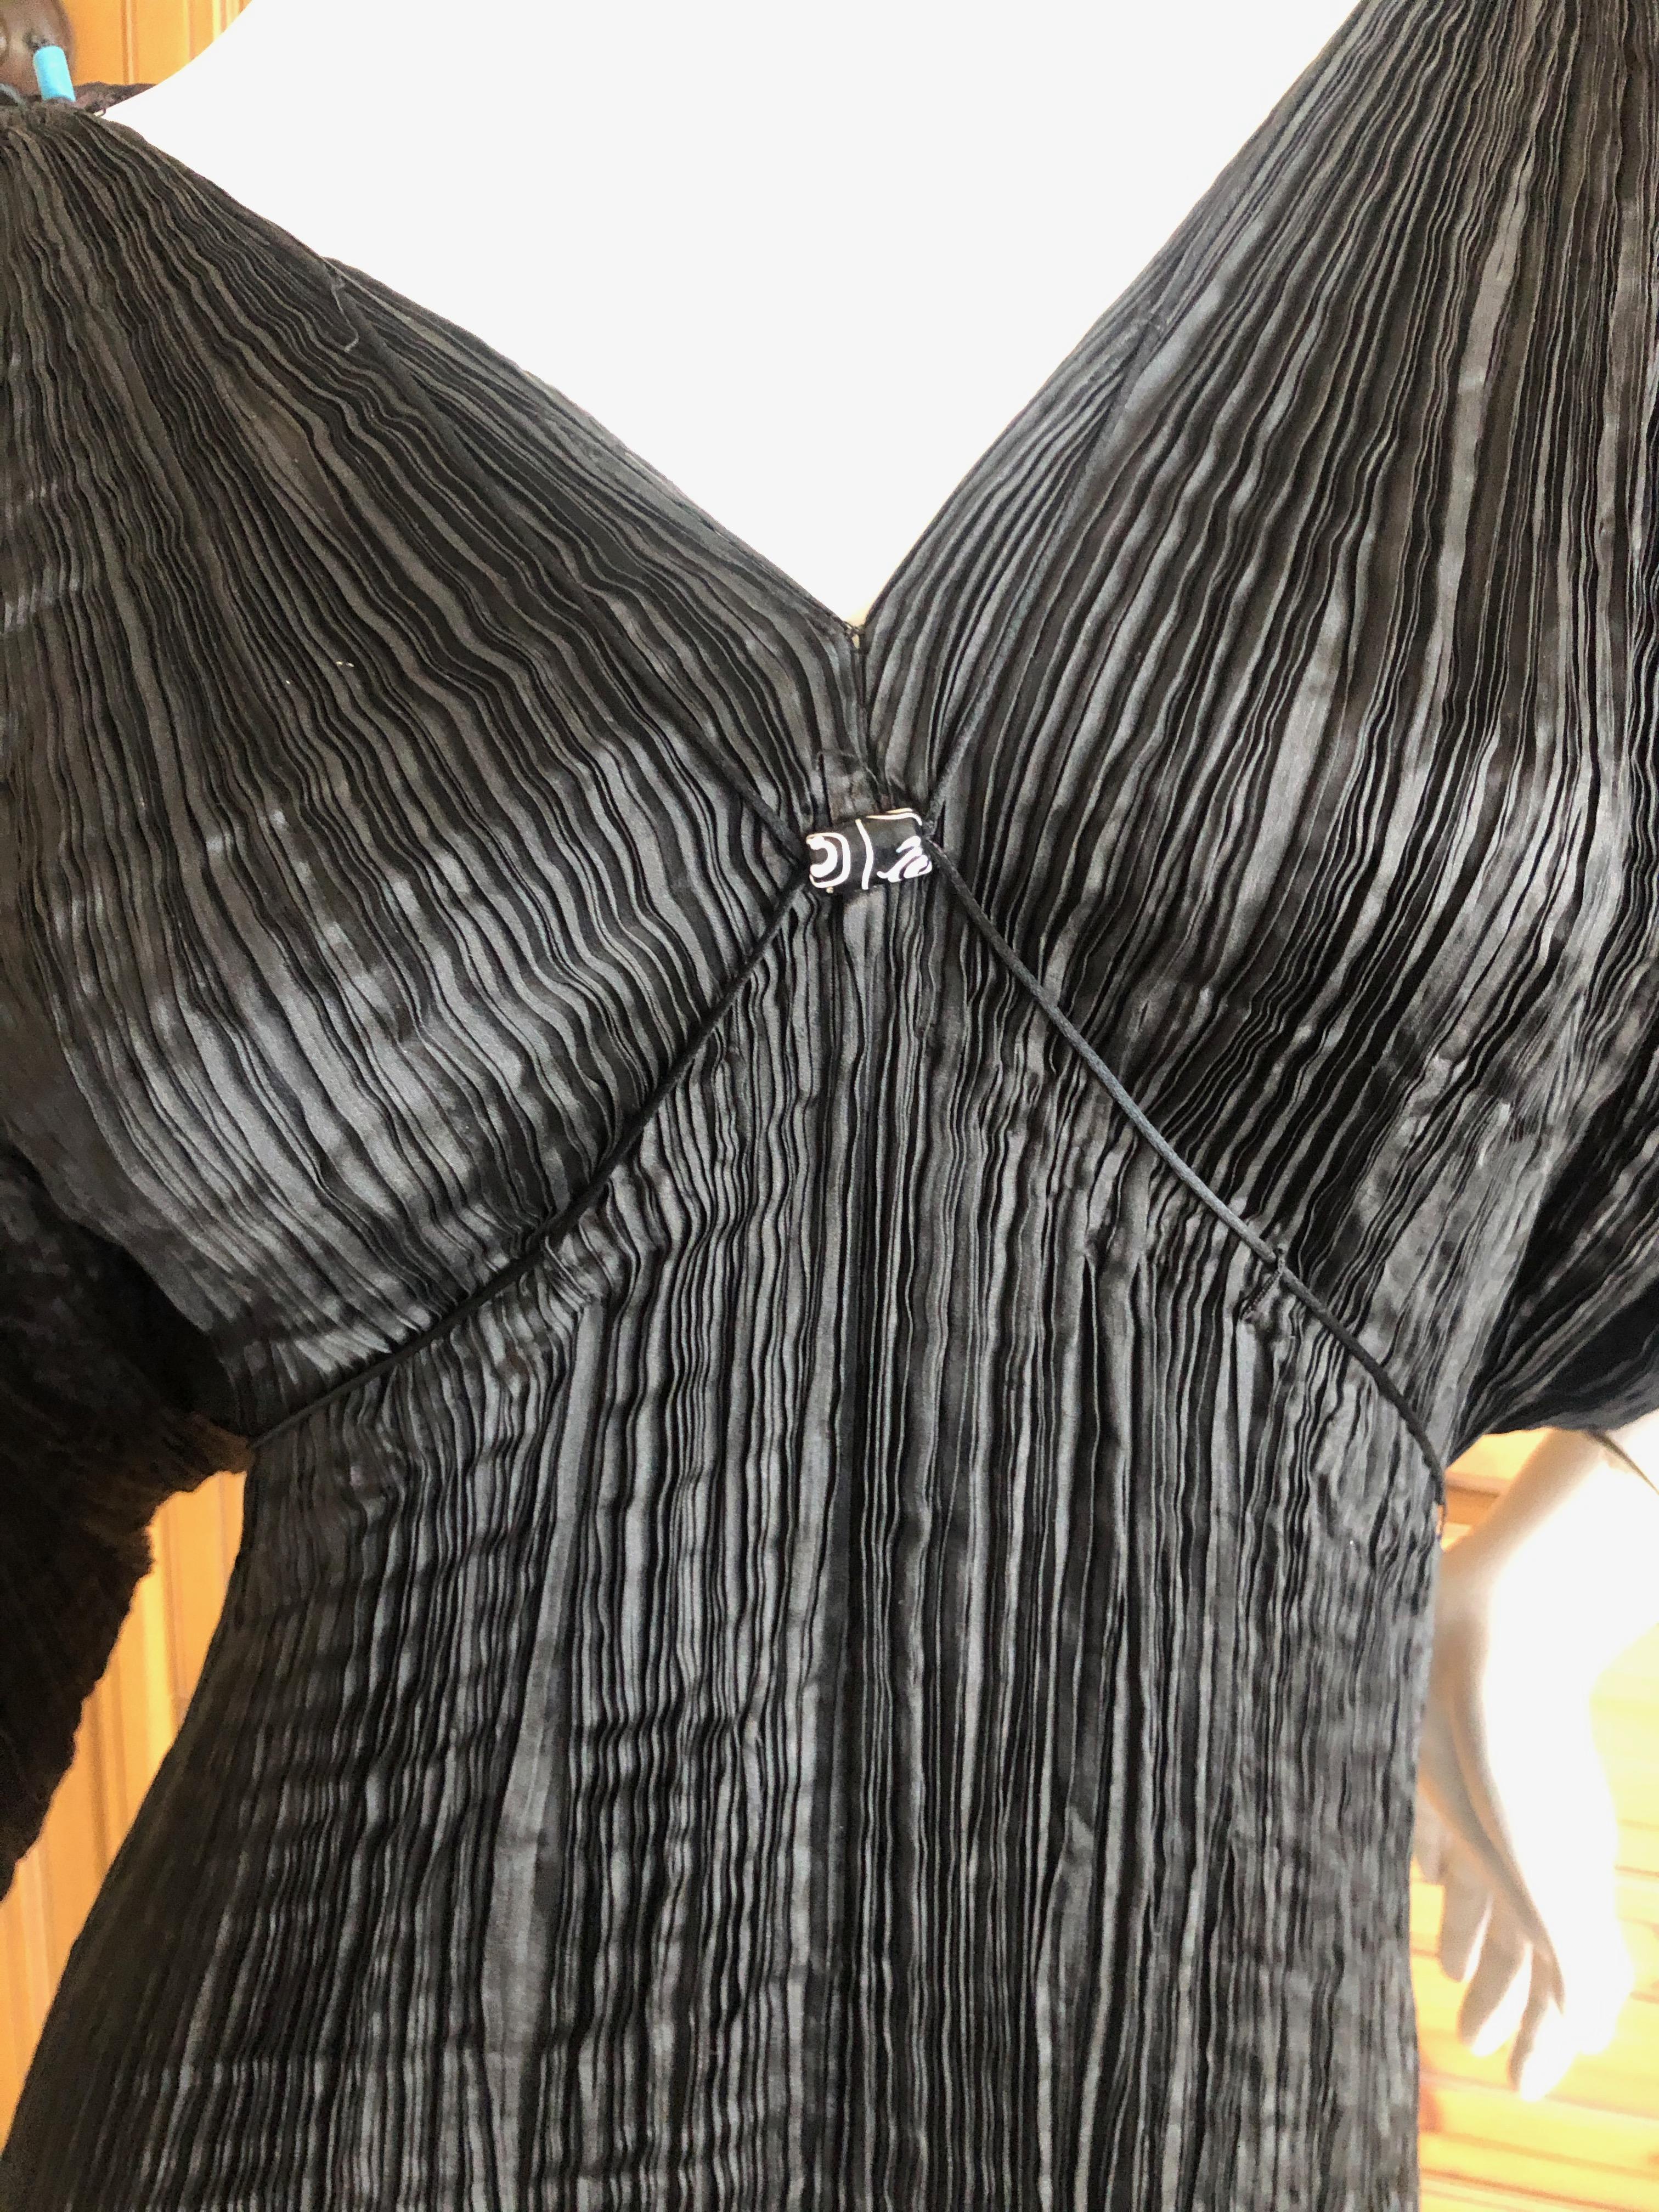 Mariano Fortuny Black Delphos Dress In Good Condition For Sale In Cloverdale, CA